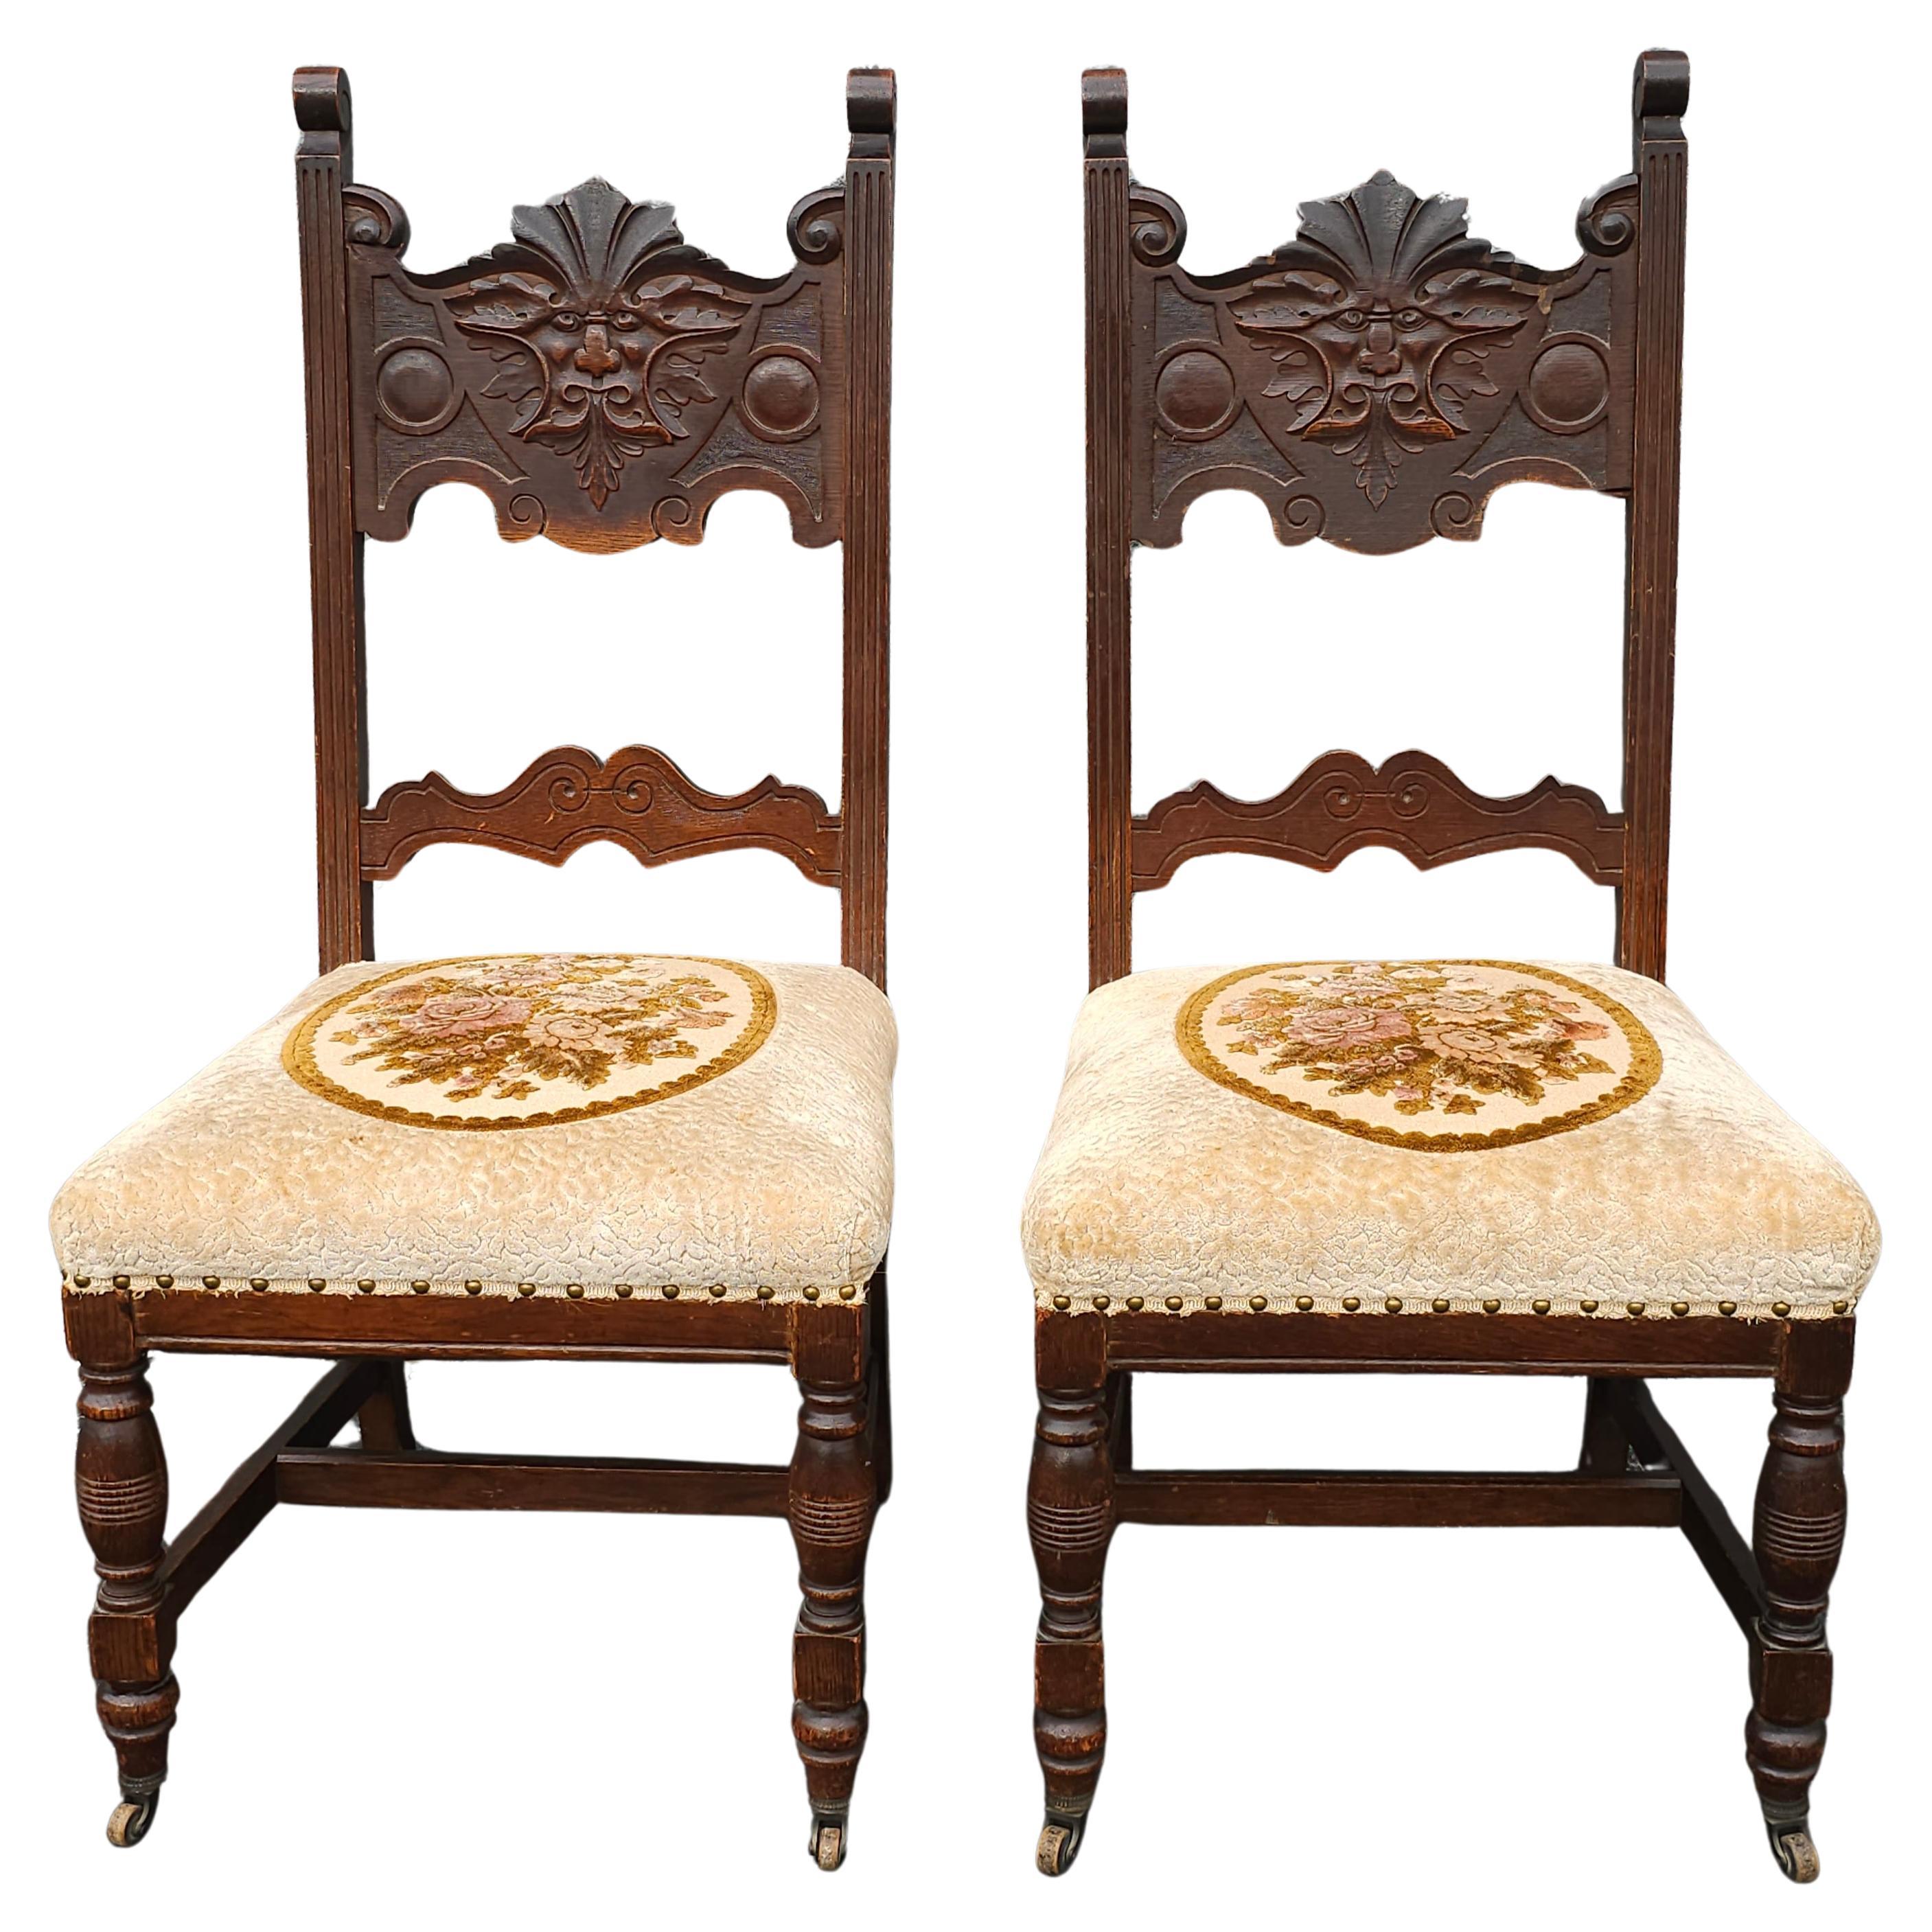 Pair Of Gothic Revival Style Stained Oak Wood And Upholstered Seat Side Chairs